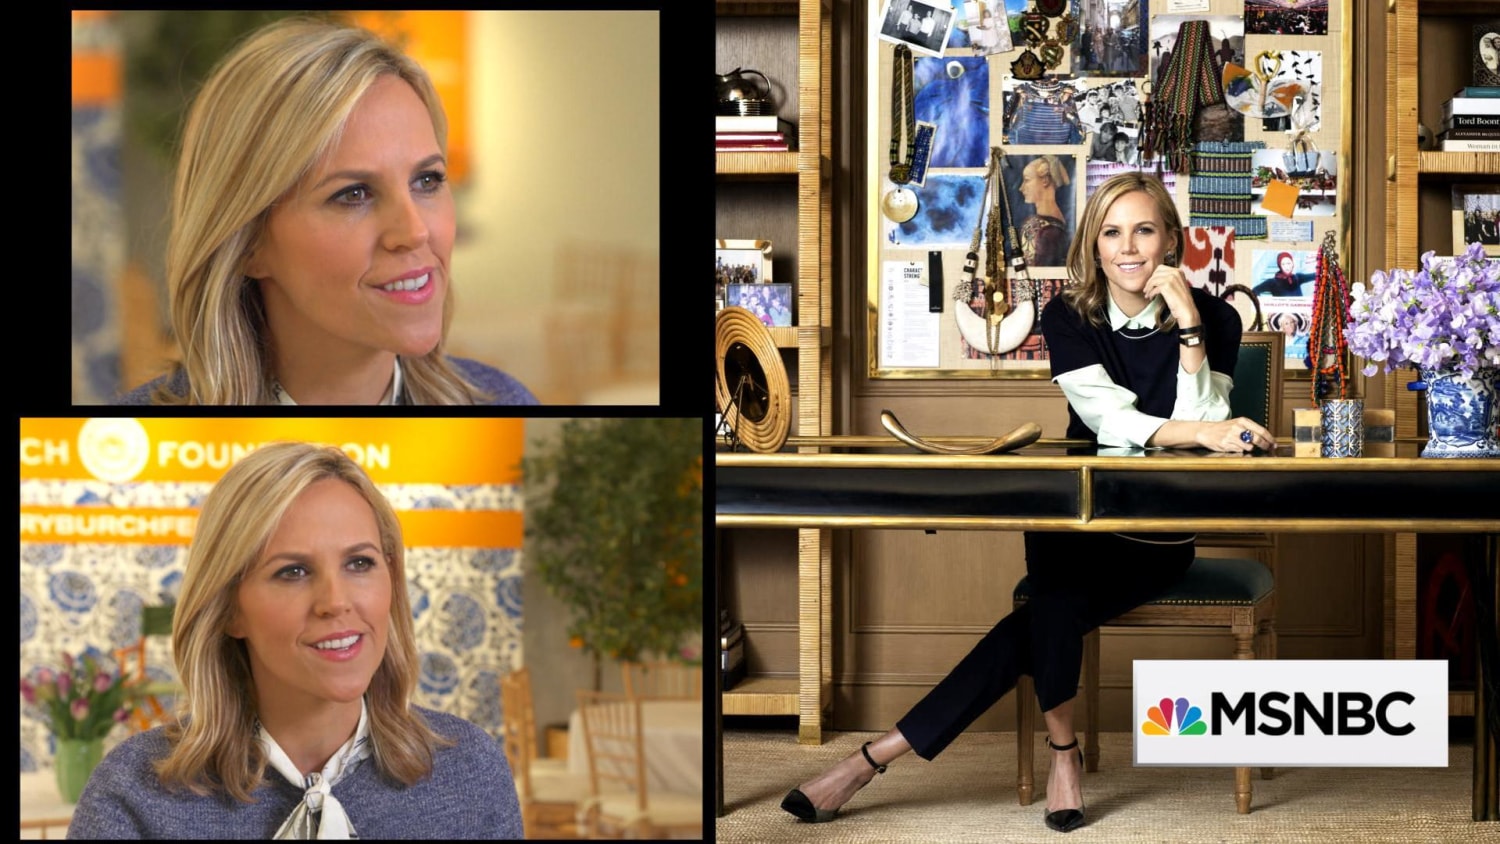 Tory Burch: 'I got my fair share of patronizing pats on the back when  starting out